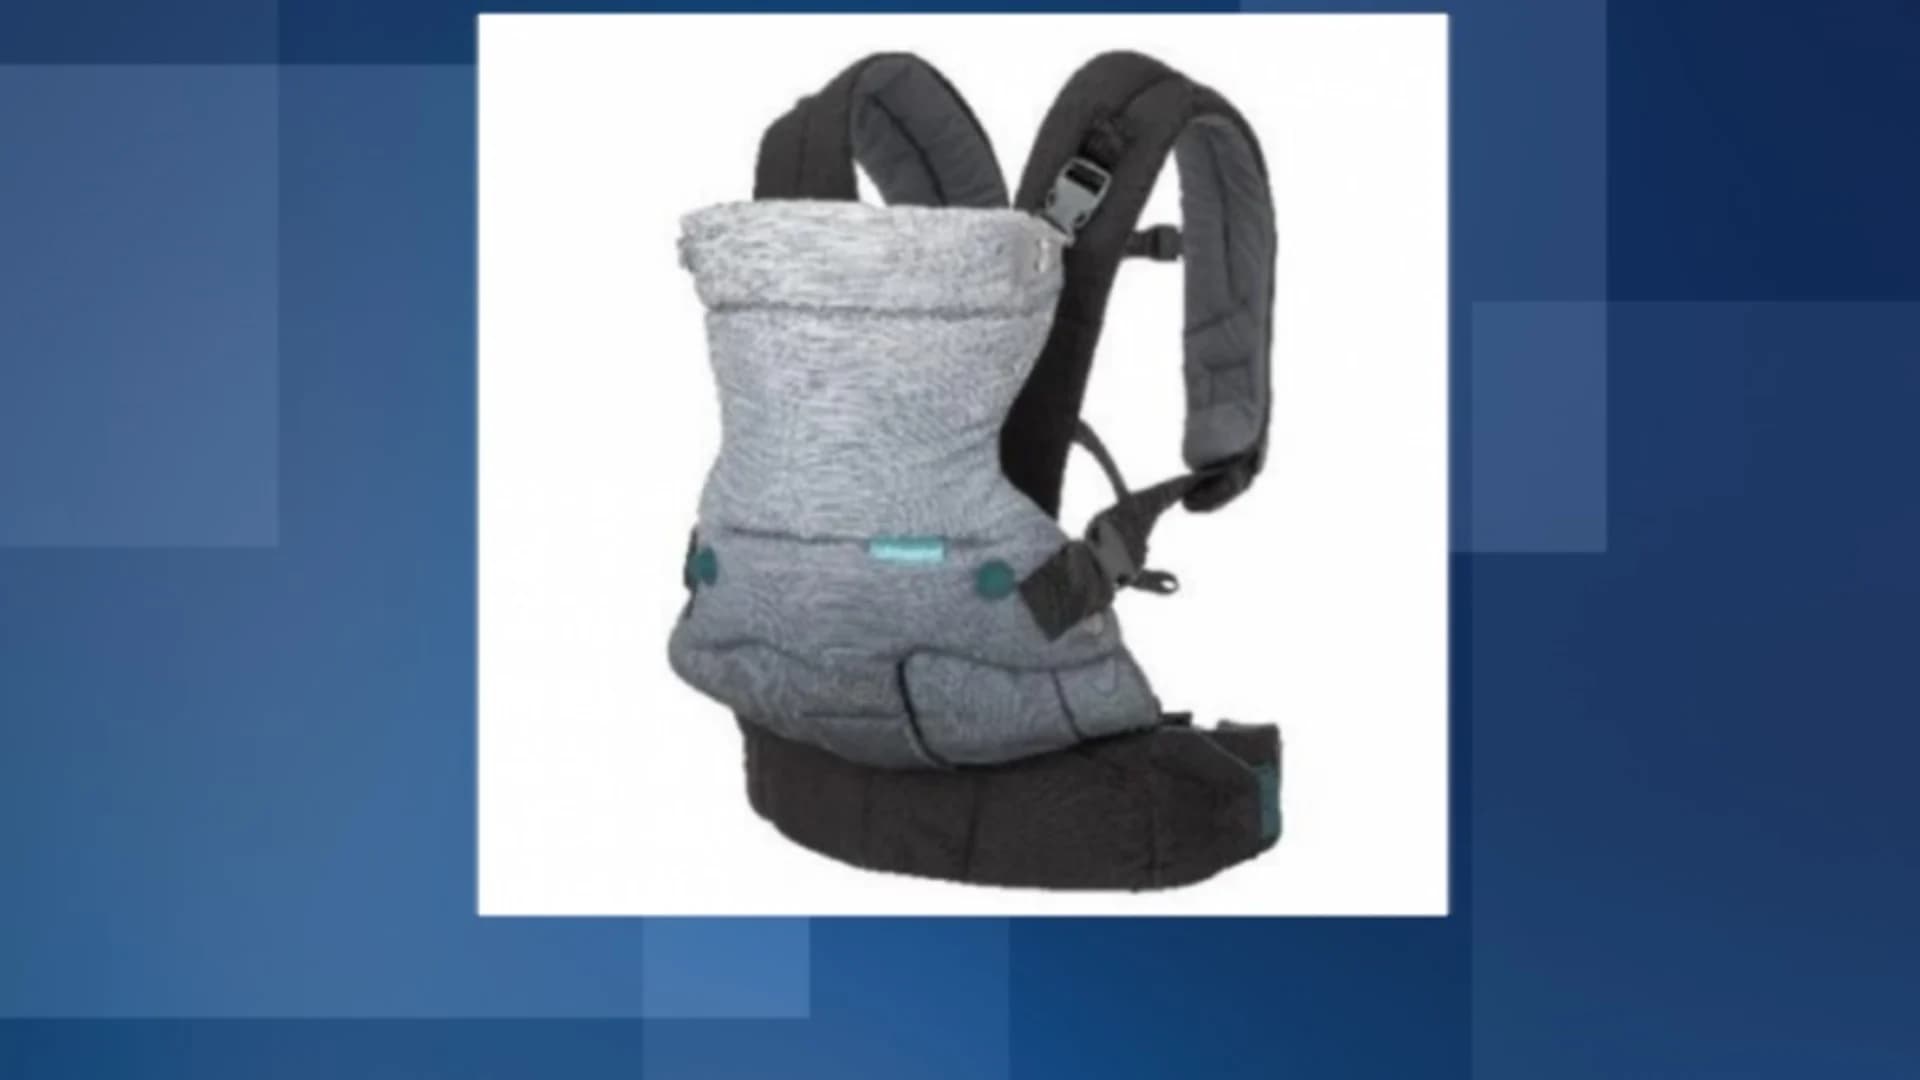 Company recalls around 14,000 infant carriers because of fall hazard